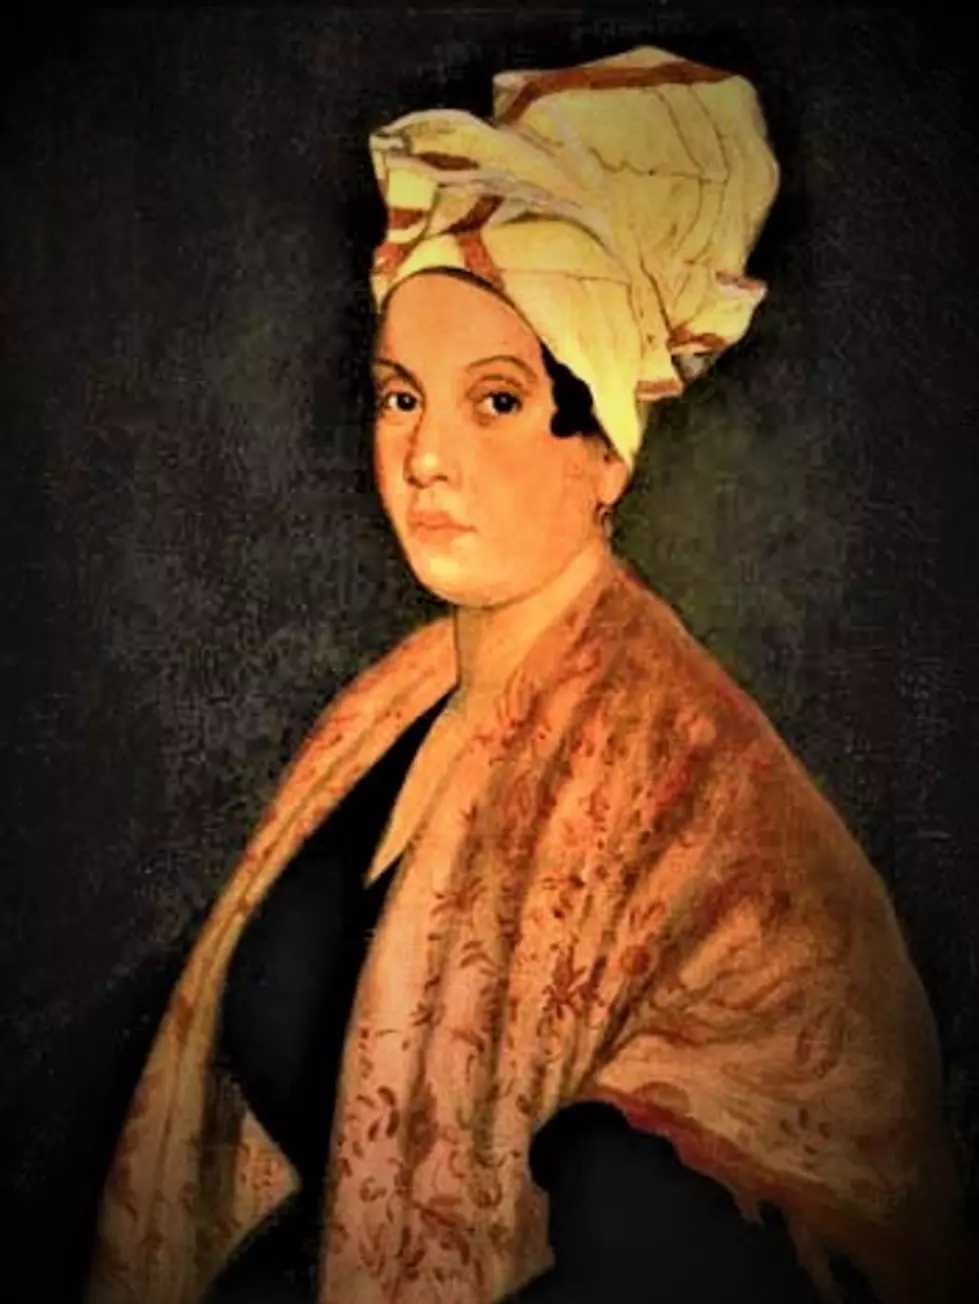 Marie Laveau Painting Sells for Almost $1 Million but Is It Her?